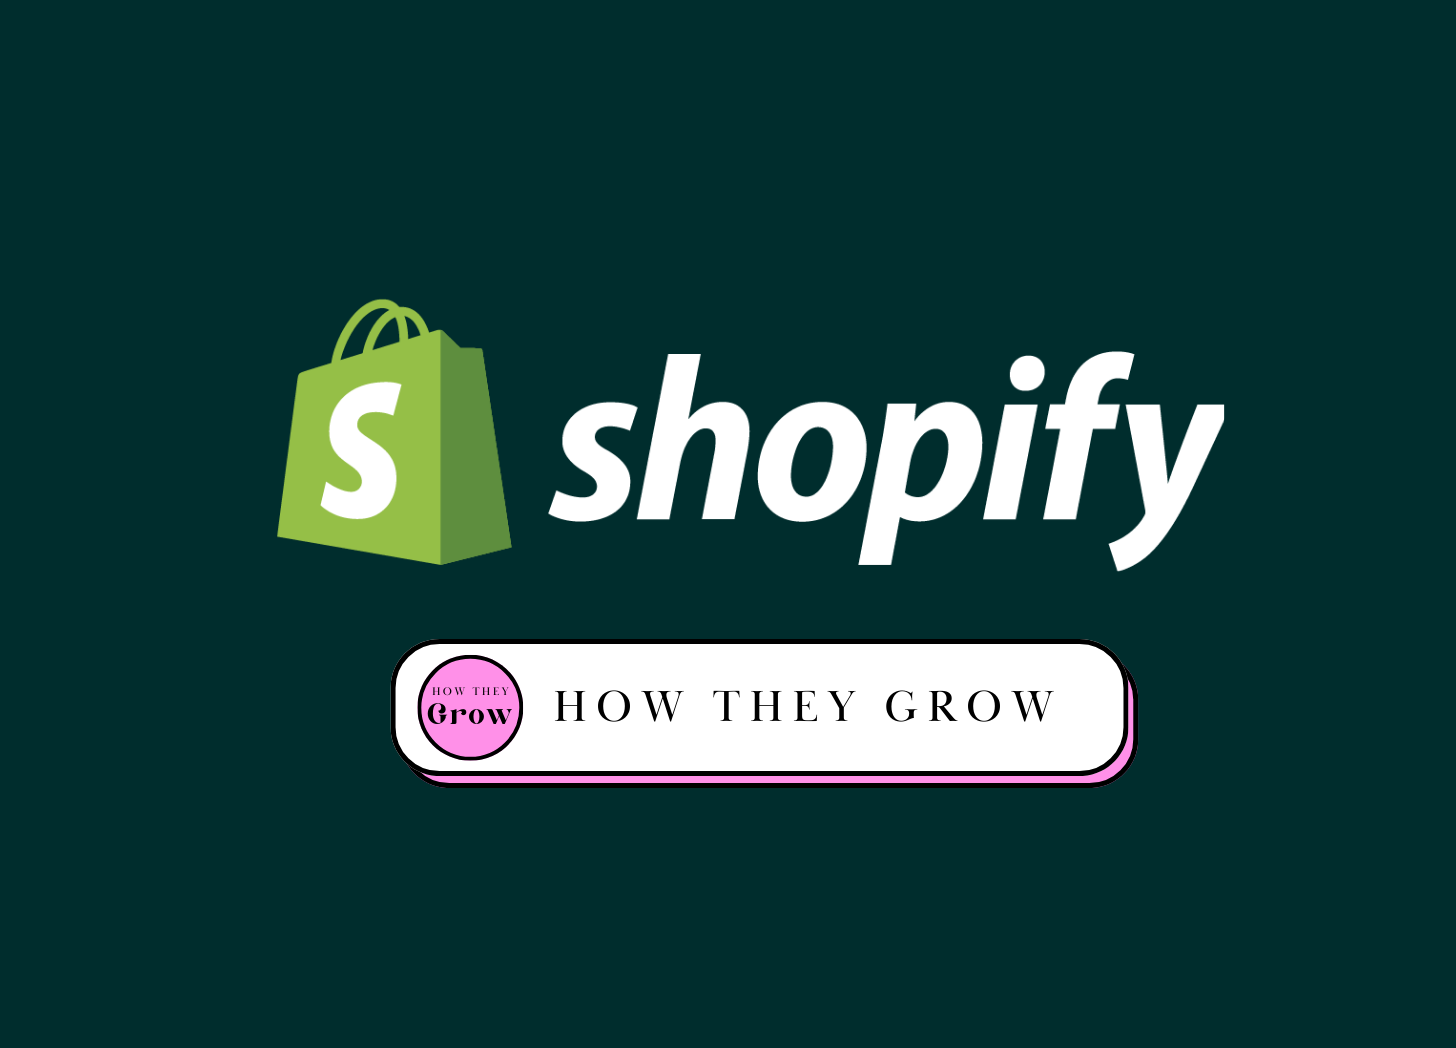 How can I transfer my license to another Shopify store?